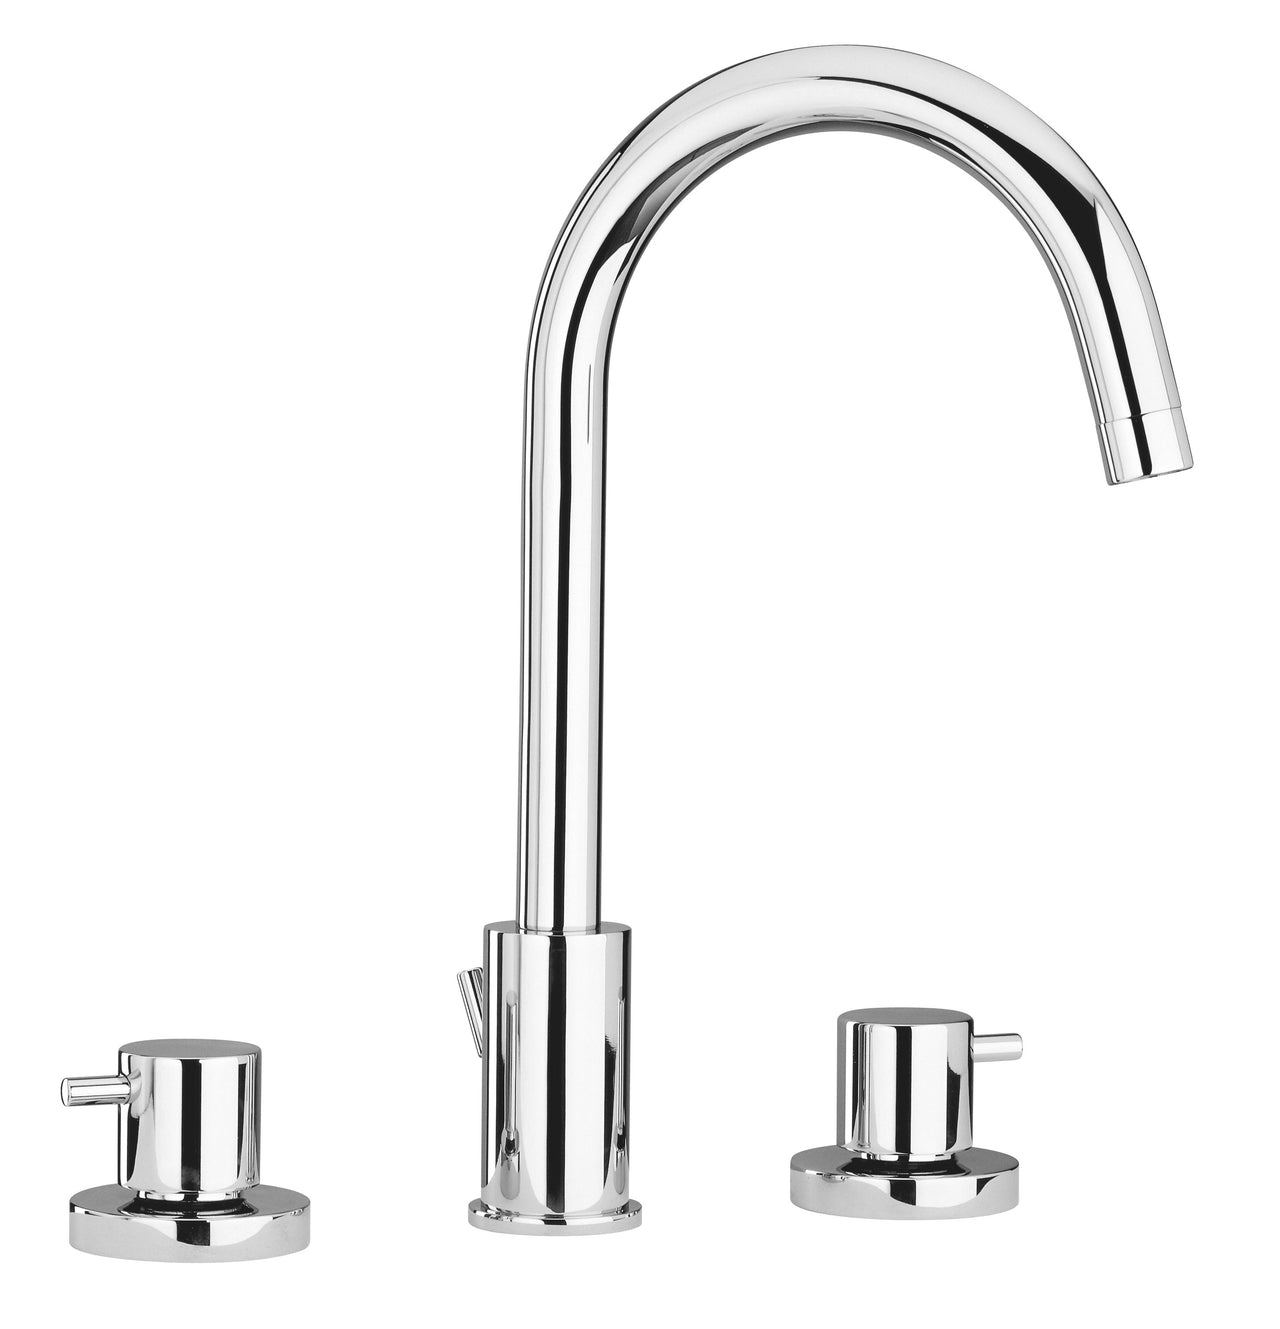 Latoscana Elba widespread lavatory faucet in a Chrome finish touch on bathroom sink faucets Latoscana 